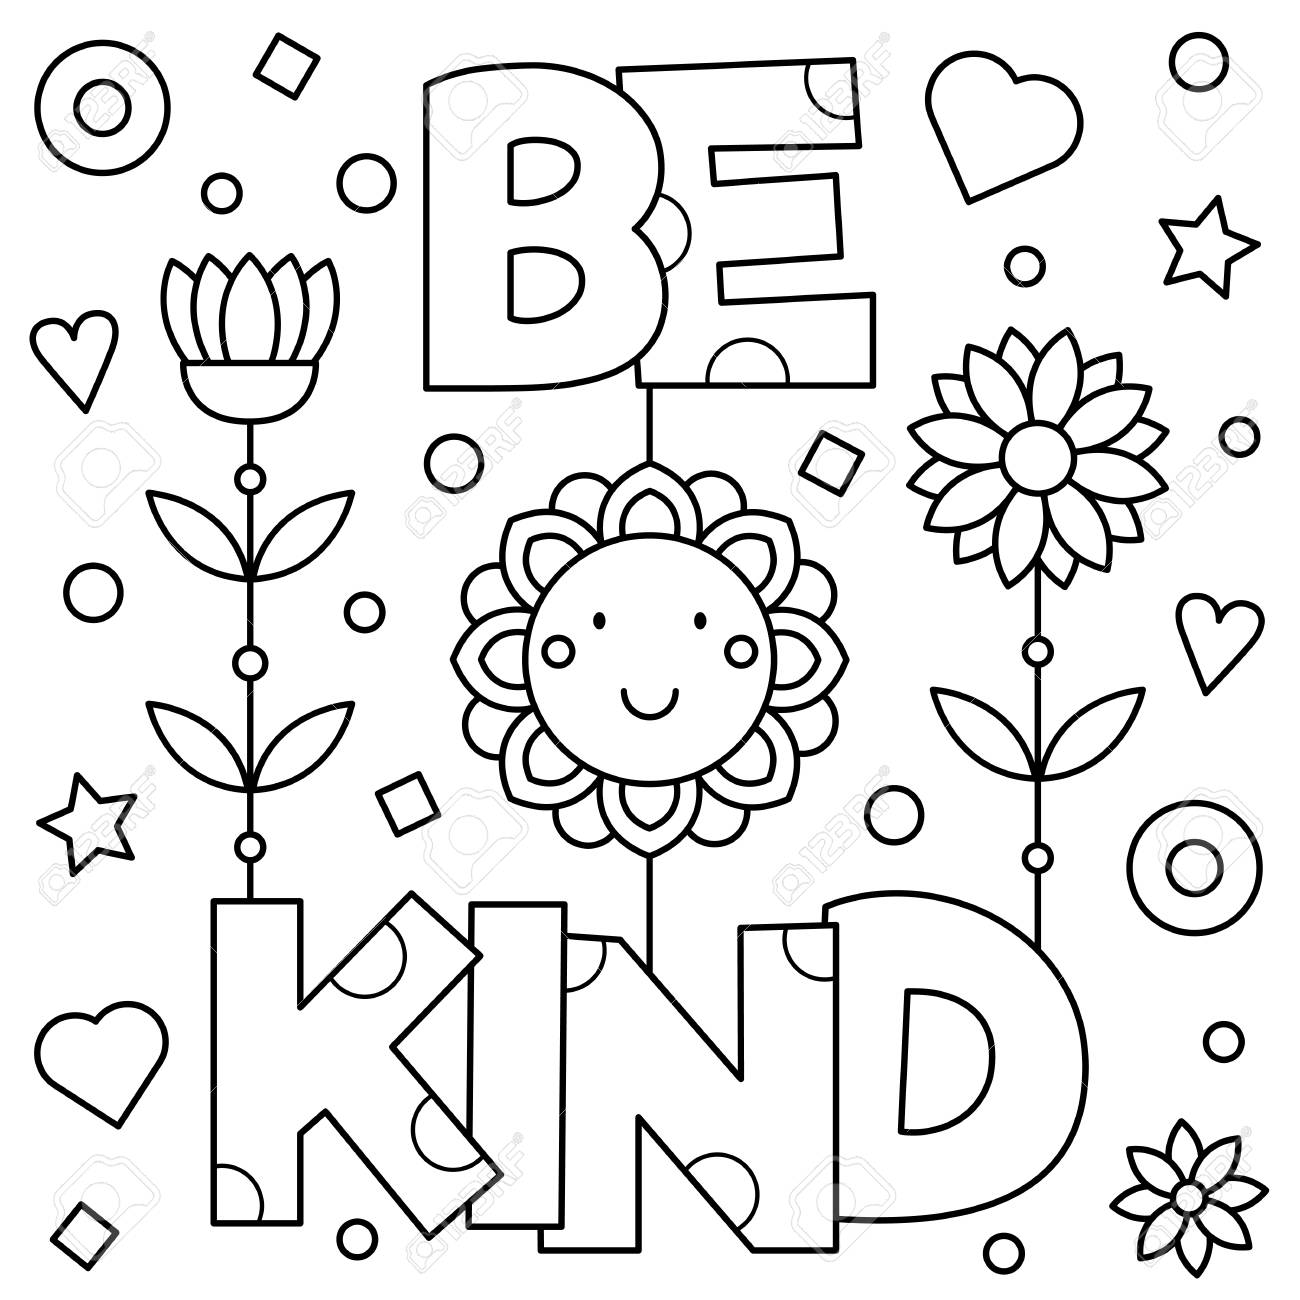 Kindness Coloring Pages For Kindergarten Kindness Coloring Pages By